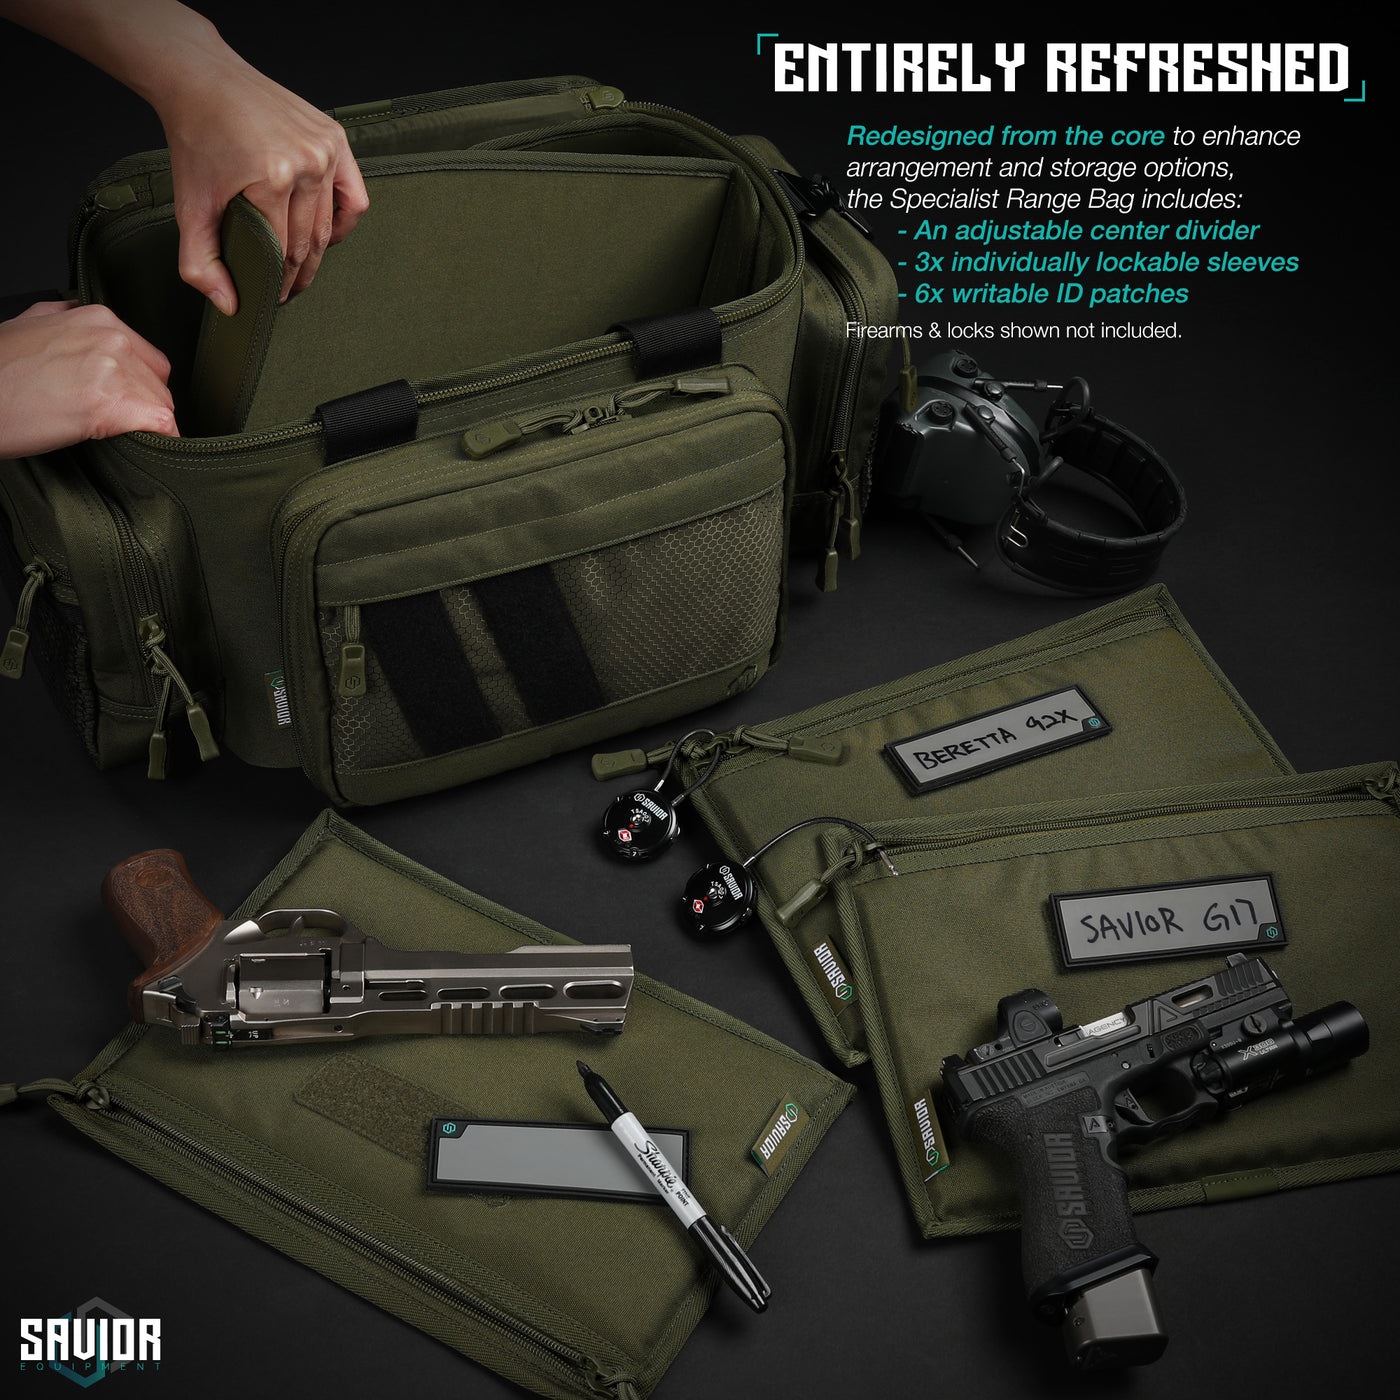 Entirely Refreshed - Redesigned from the core to enhance arrangement and storage options, the Specialist Range Bag includes: An adjustable center divier. 3x individually lockable sleeves. 6x writable ID patches.